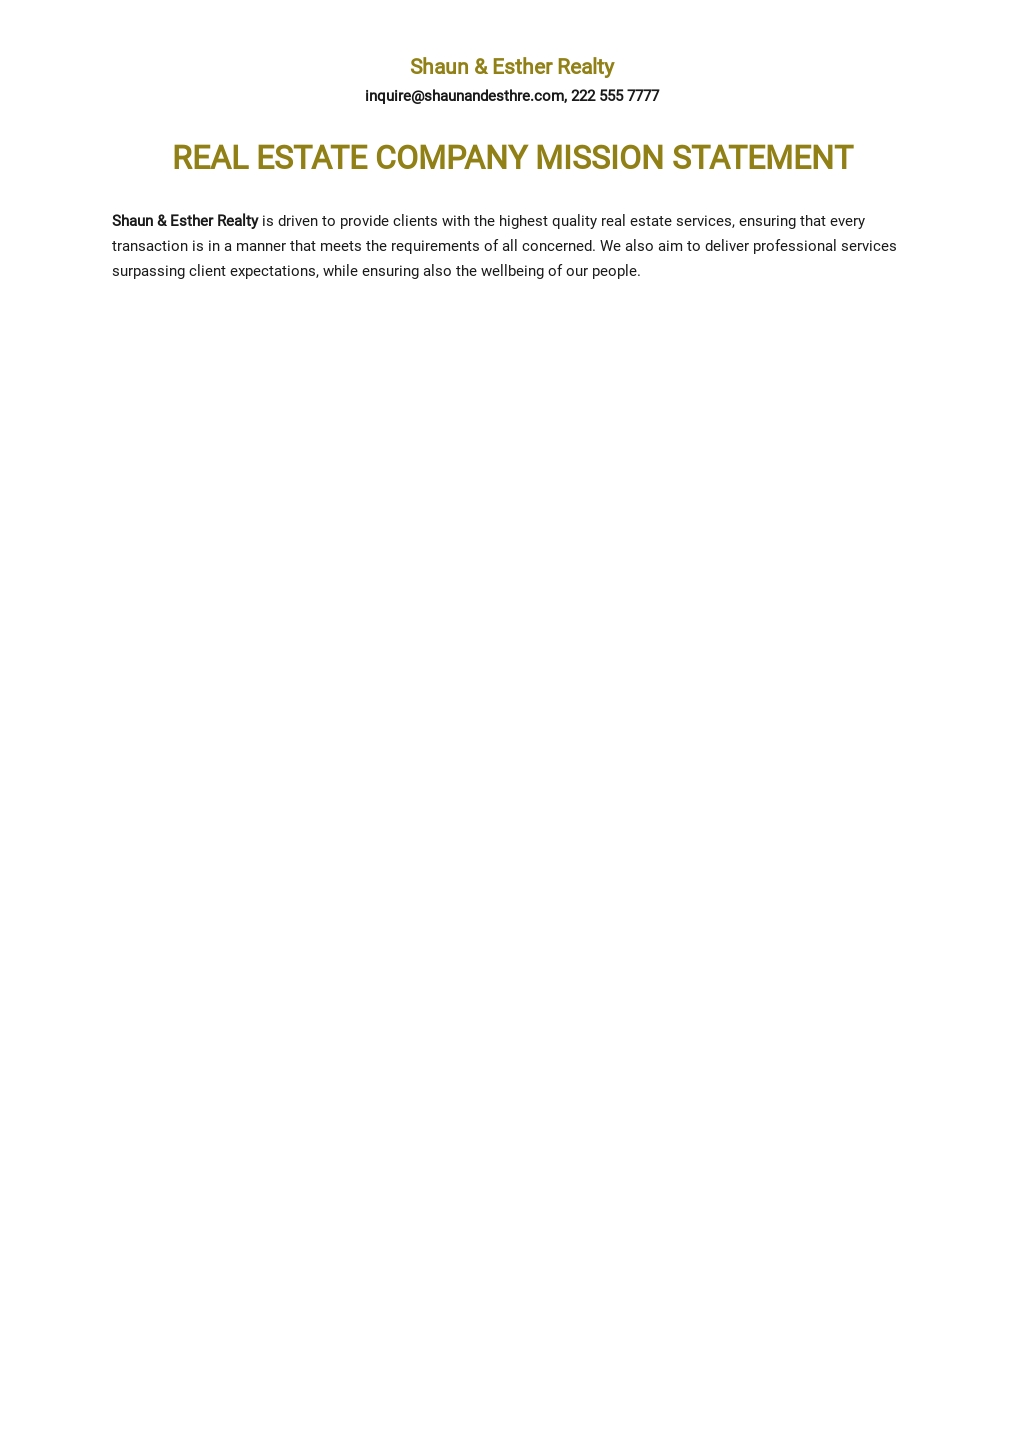 Real Estate Company Sample Mission Statement Template.jpe